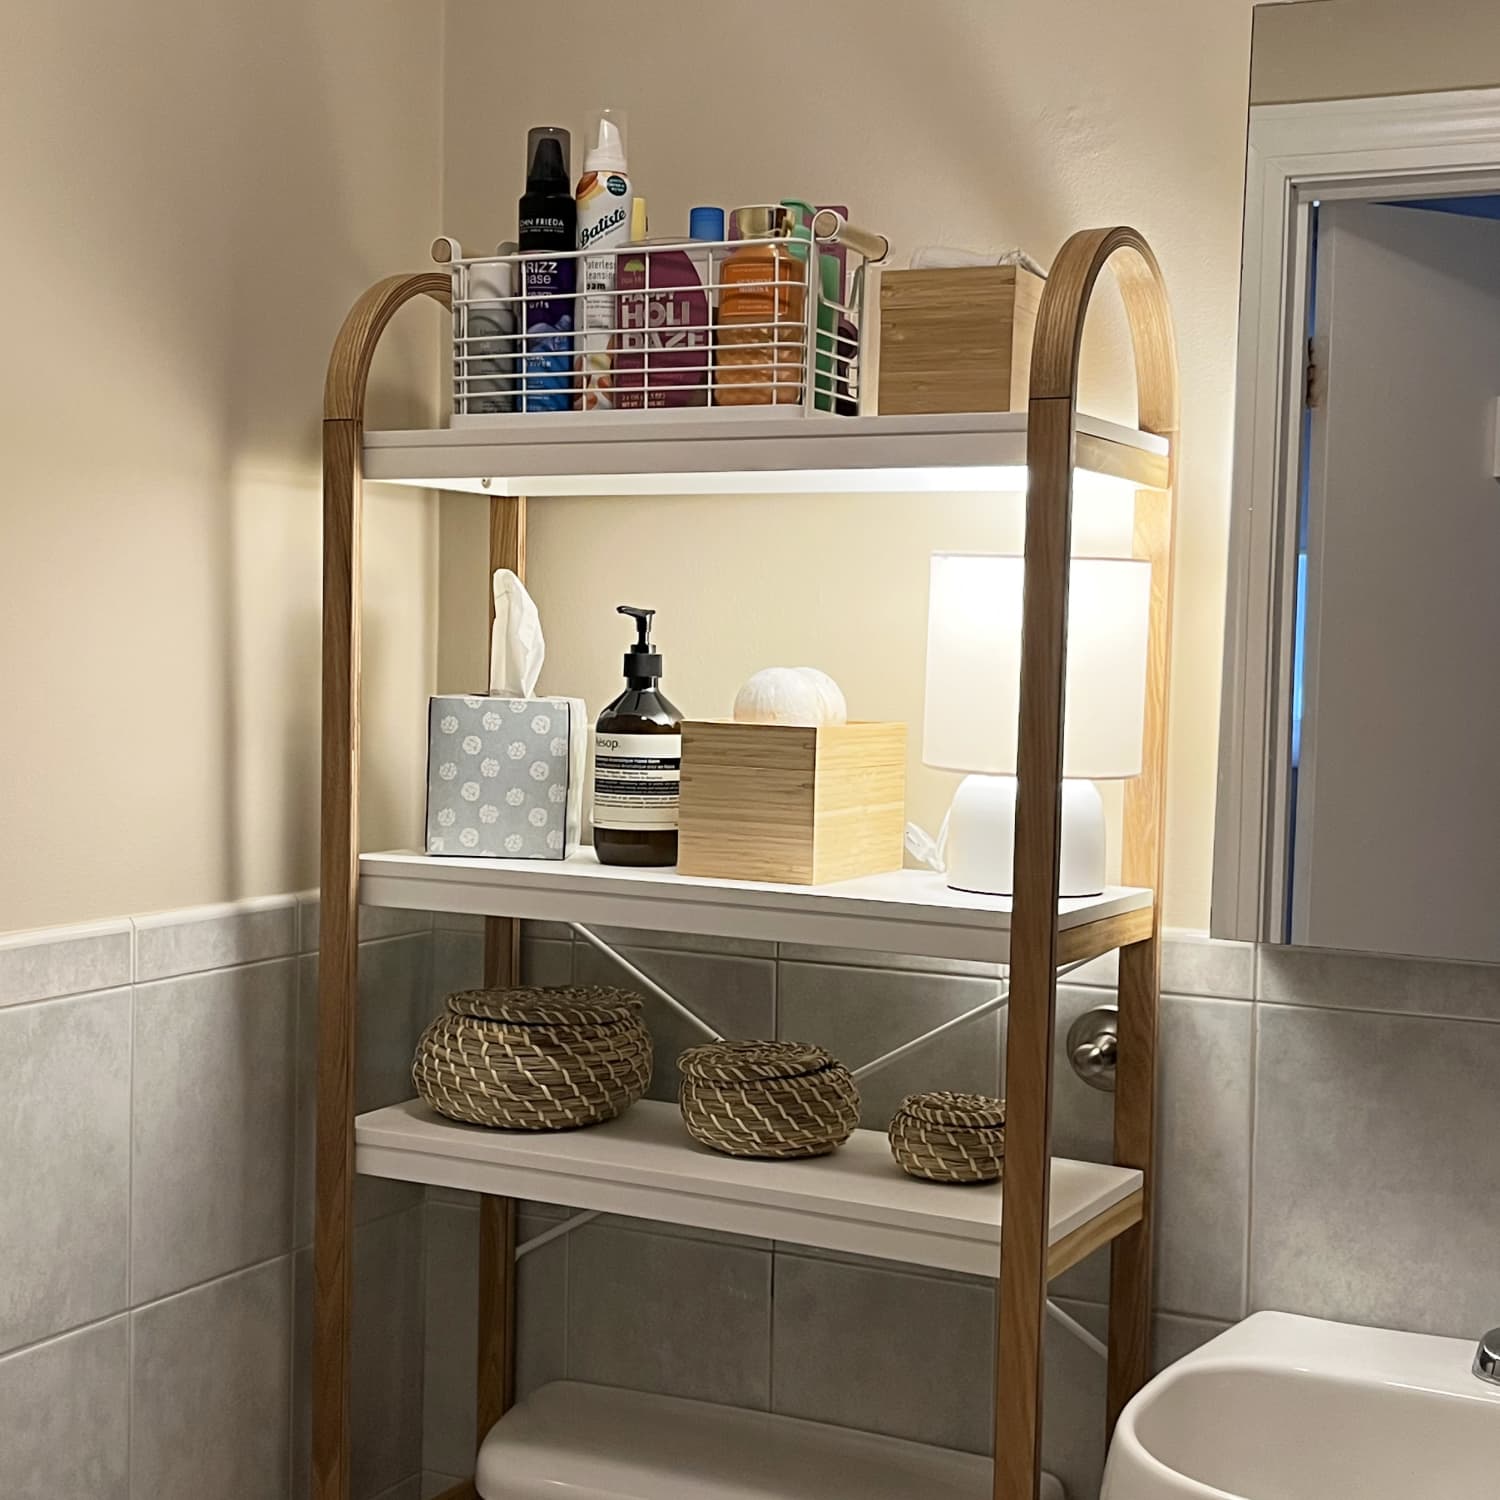 I Never Loved the Look an Over-the-Toilet Shelf — Until I Found